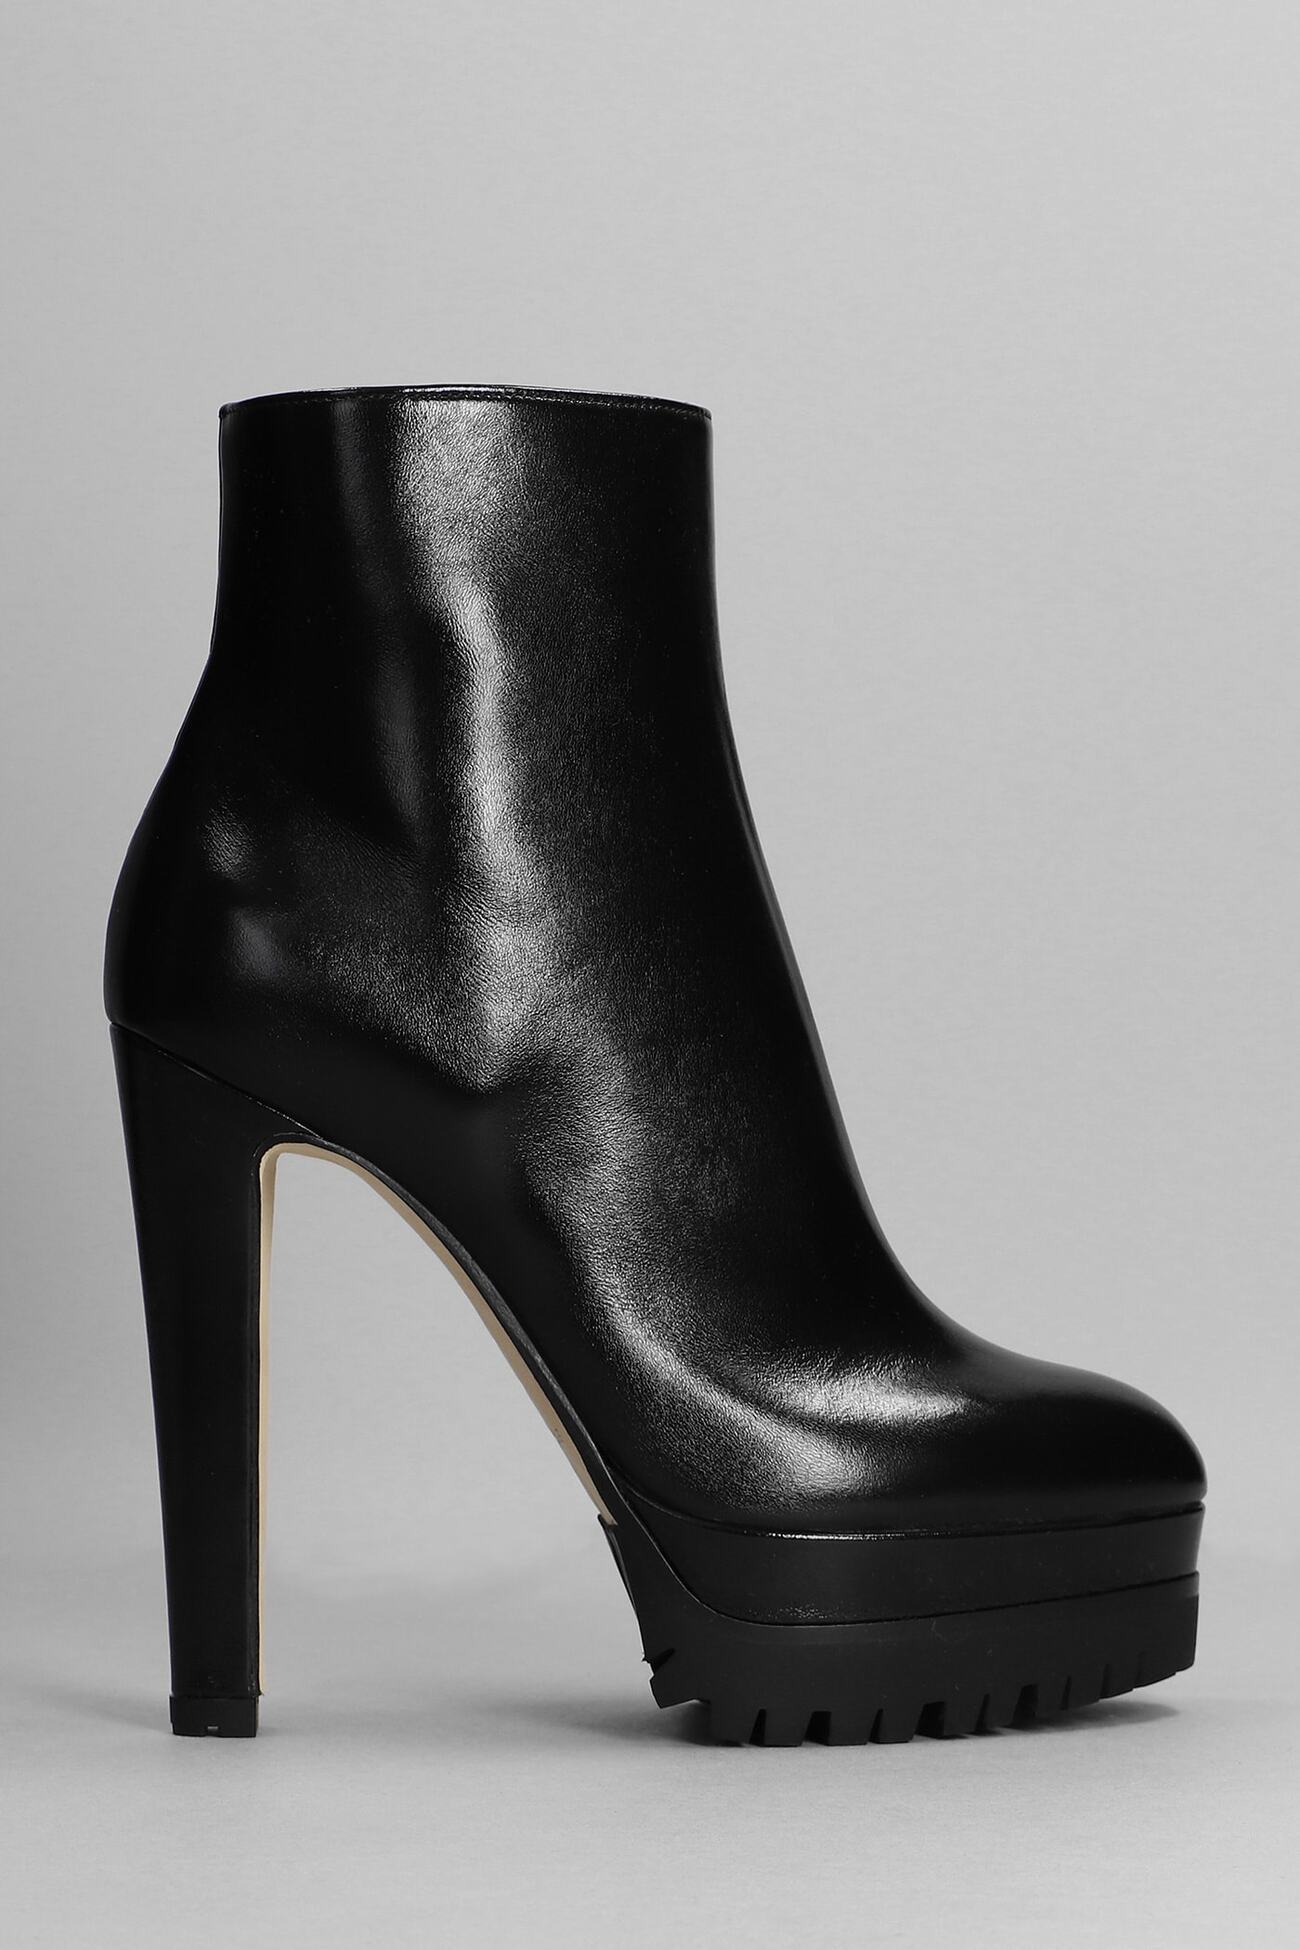 Sergio Rossi High Heels Ankle Boots In Black Leather